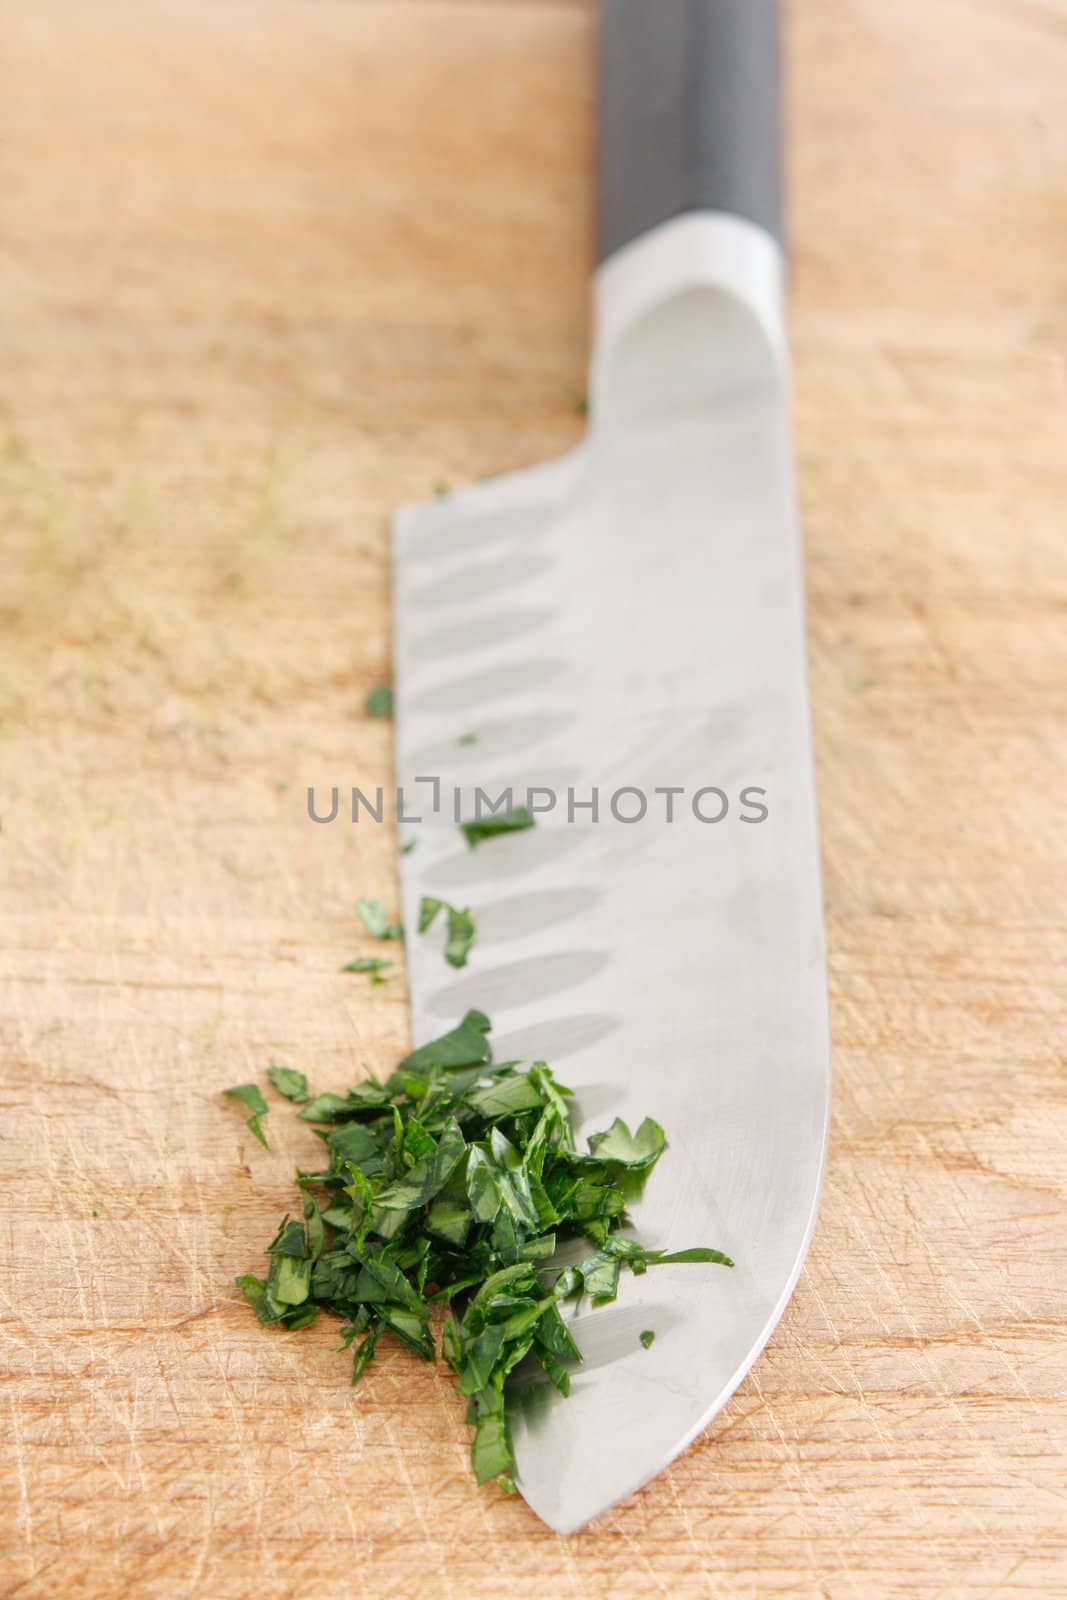 Chopping parsley on a wooden surface